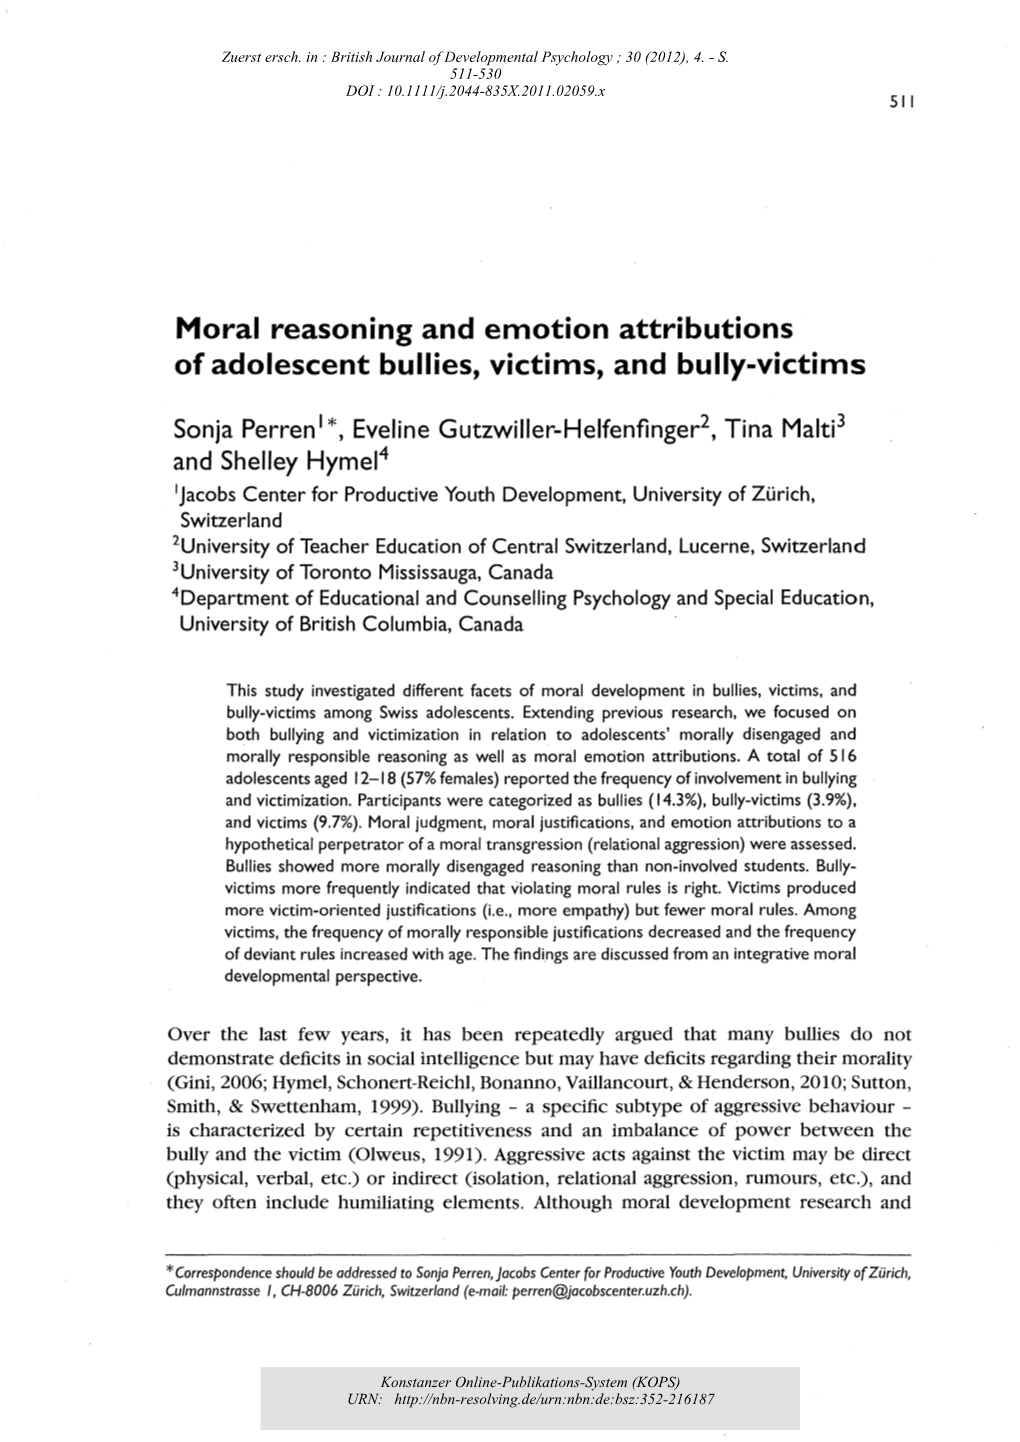 Moral Reasoning and Emotion Attributions of Adolescent Bullies, Victims, and Bully-Victims